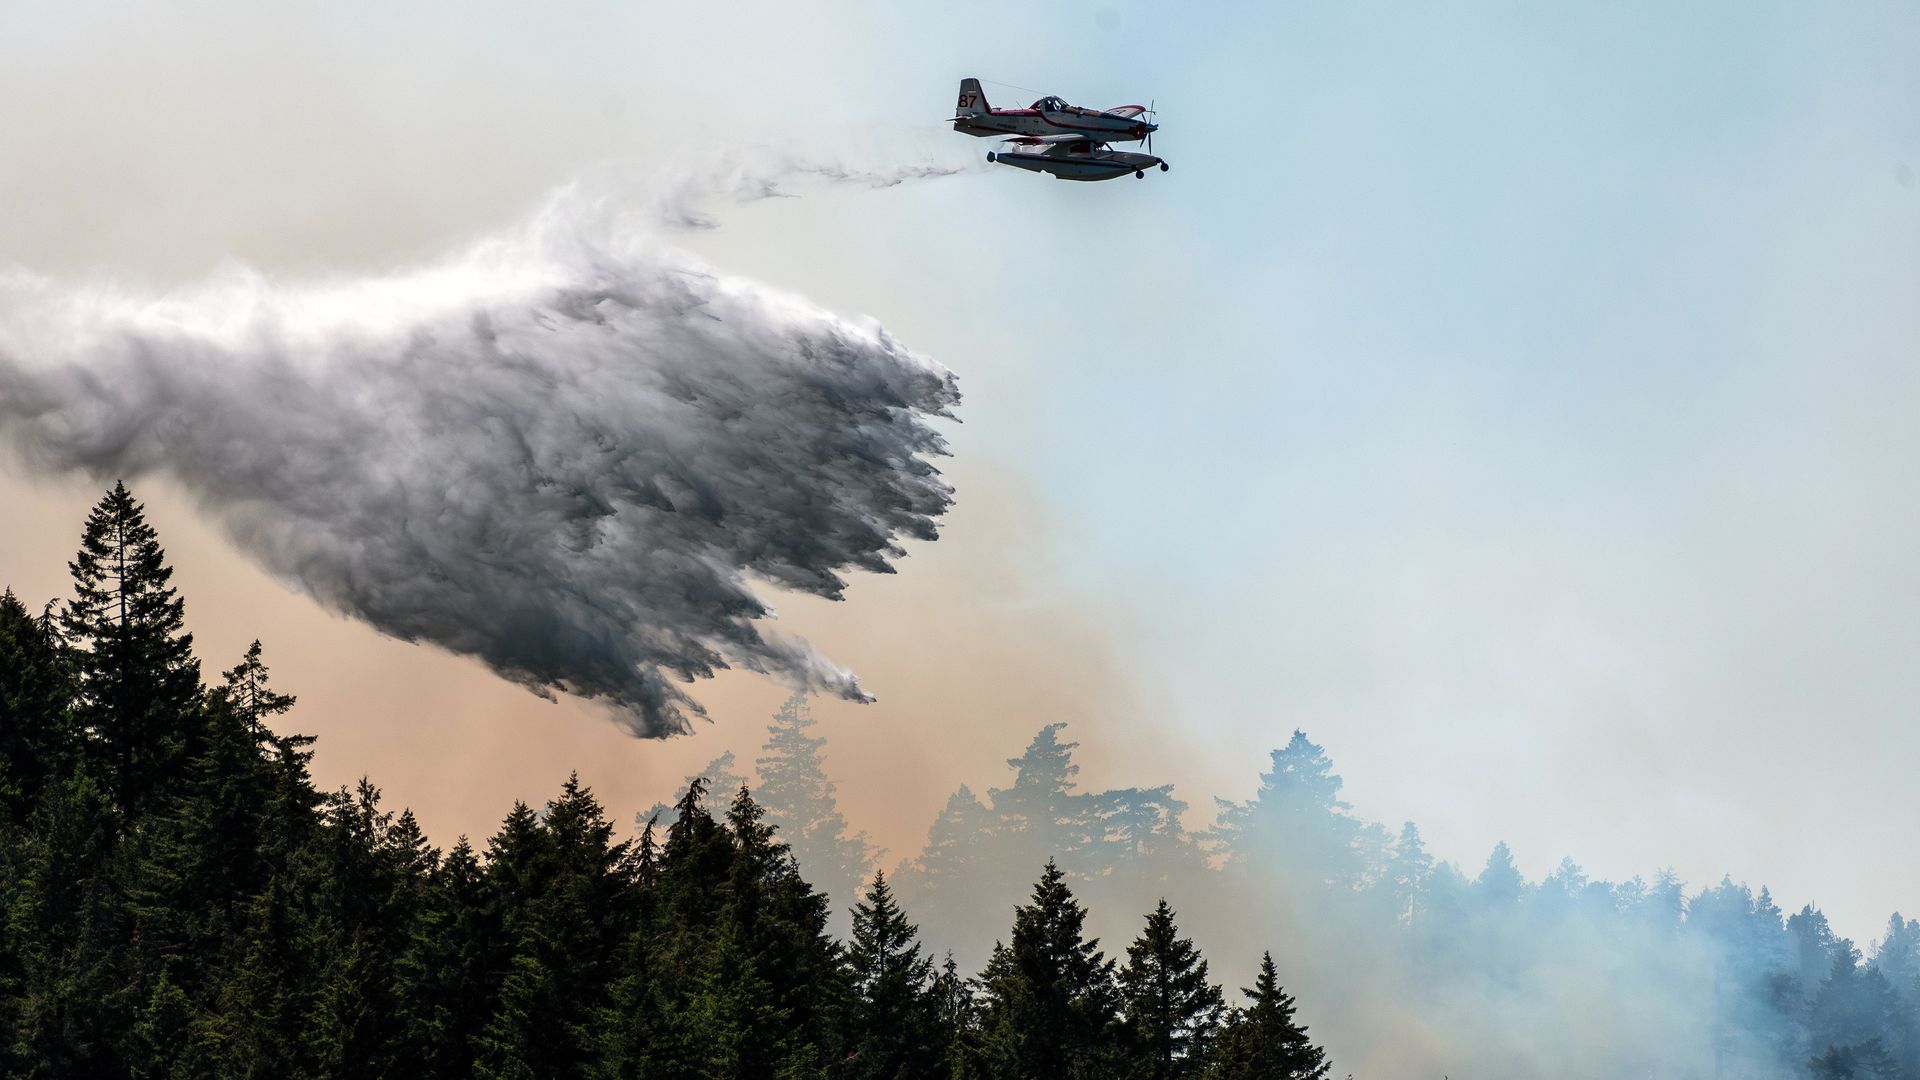 A plane sprays water on a burning forest in Canada, with smoke billowing from the fire.